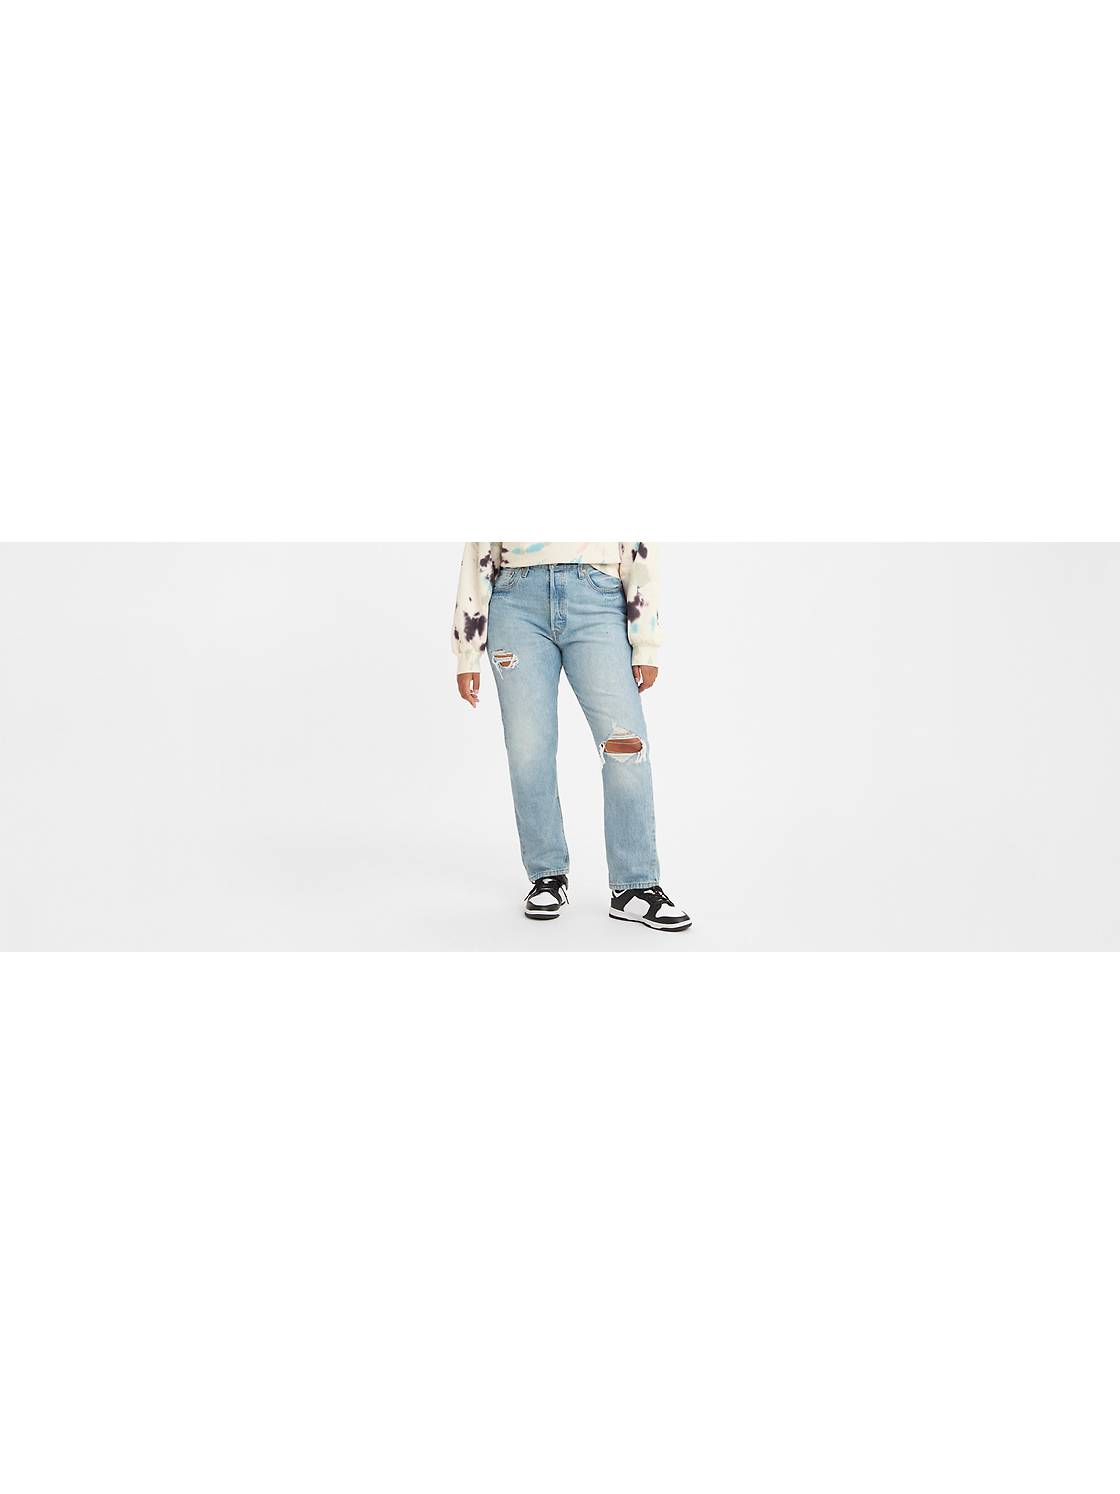 Ripped Jeans - Distressed Jeans - Ripped & Jeans for Women |